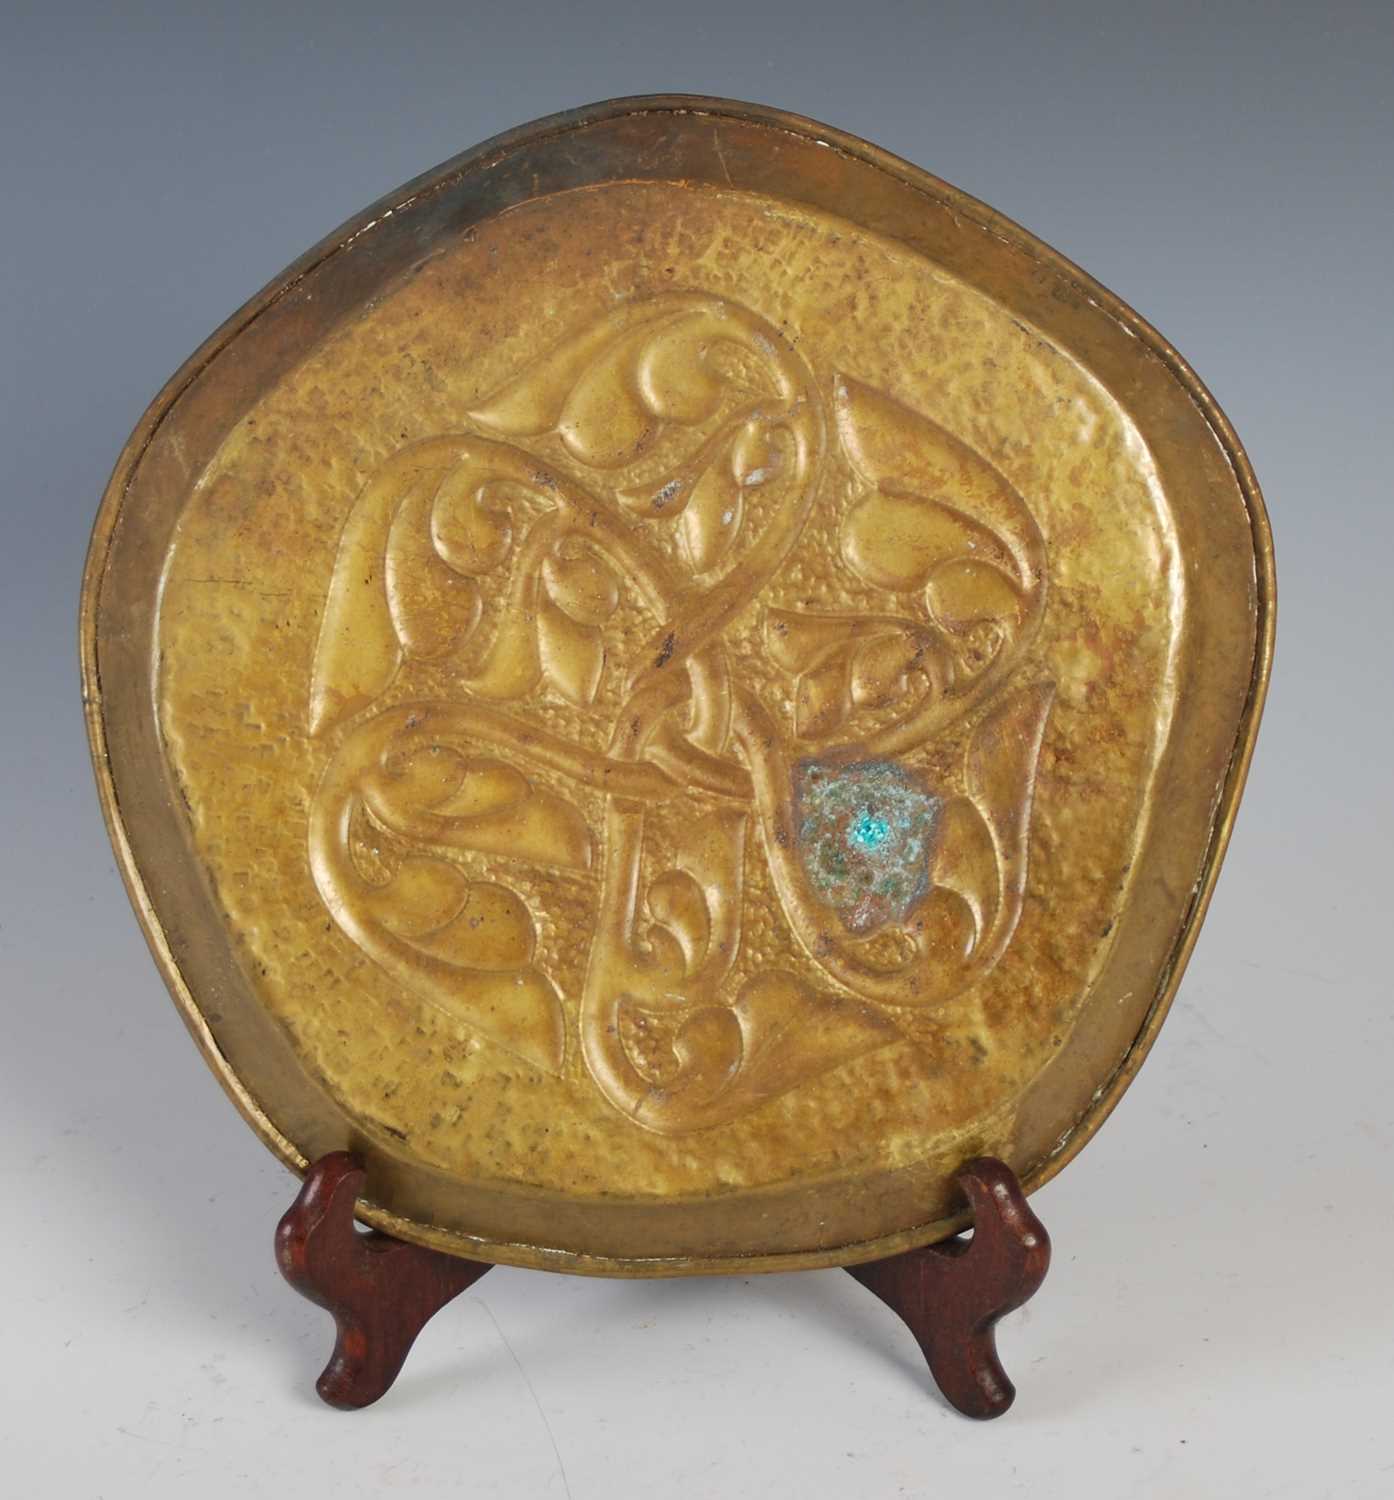 Attributed to Alexander Ritchie, an Arts & Crafts pentagonal shaped tray, 25cm diameter. - Image 2 of 2